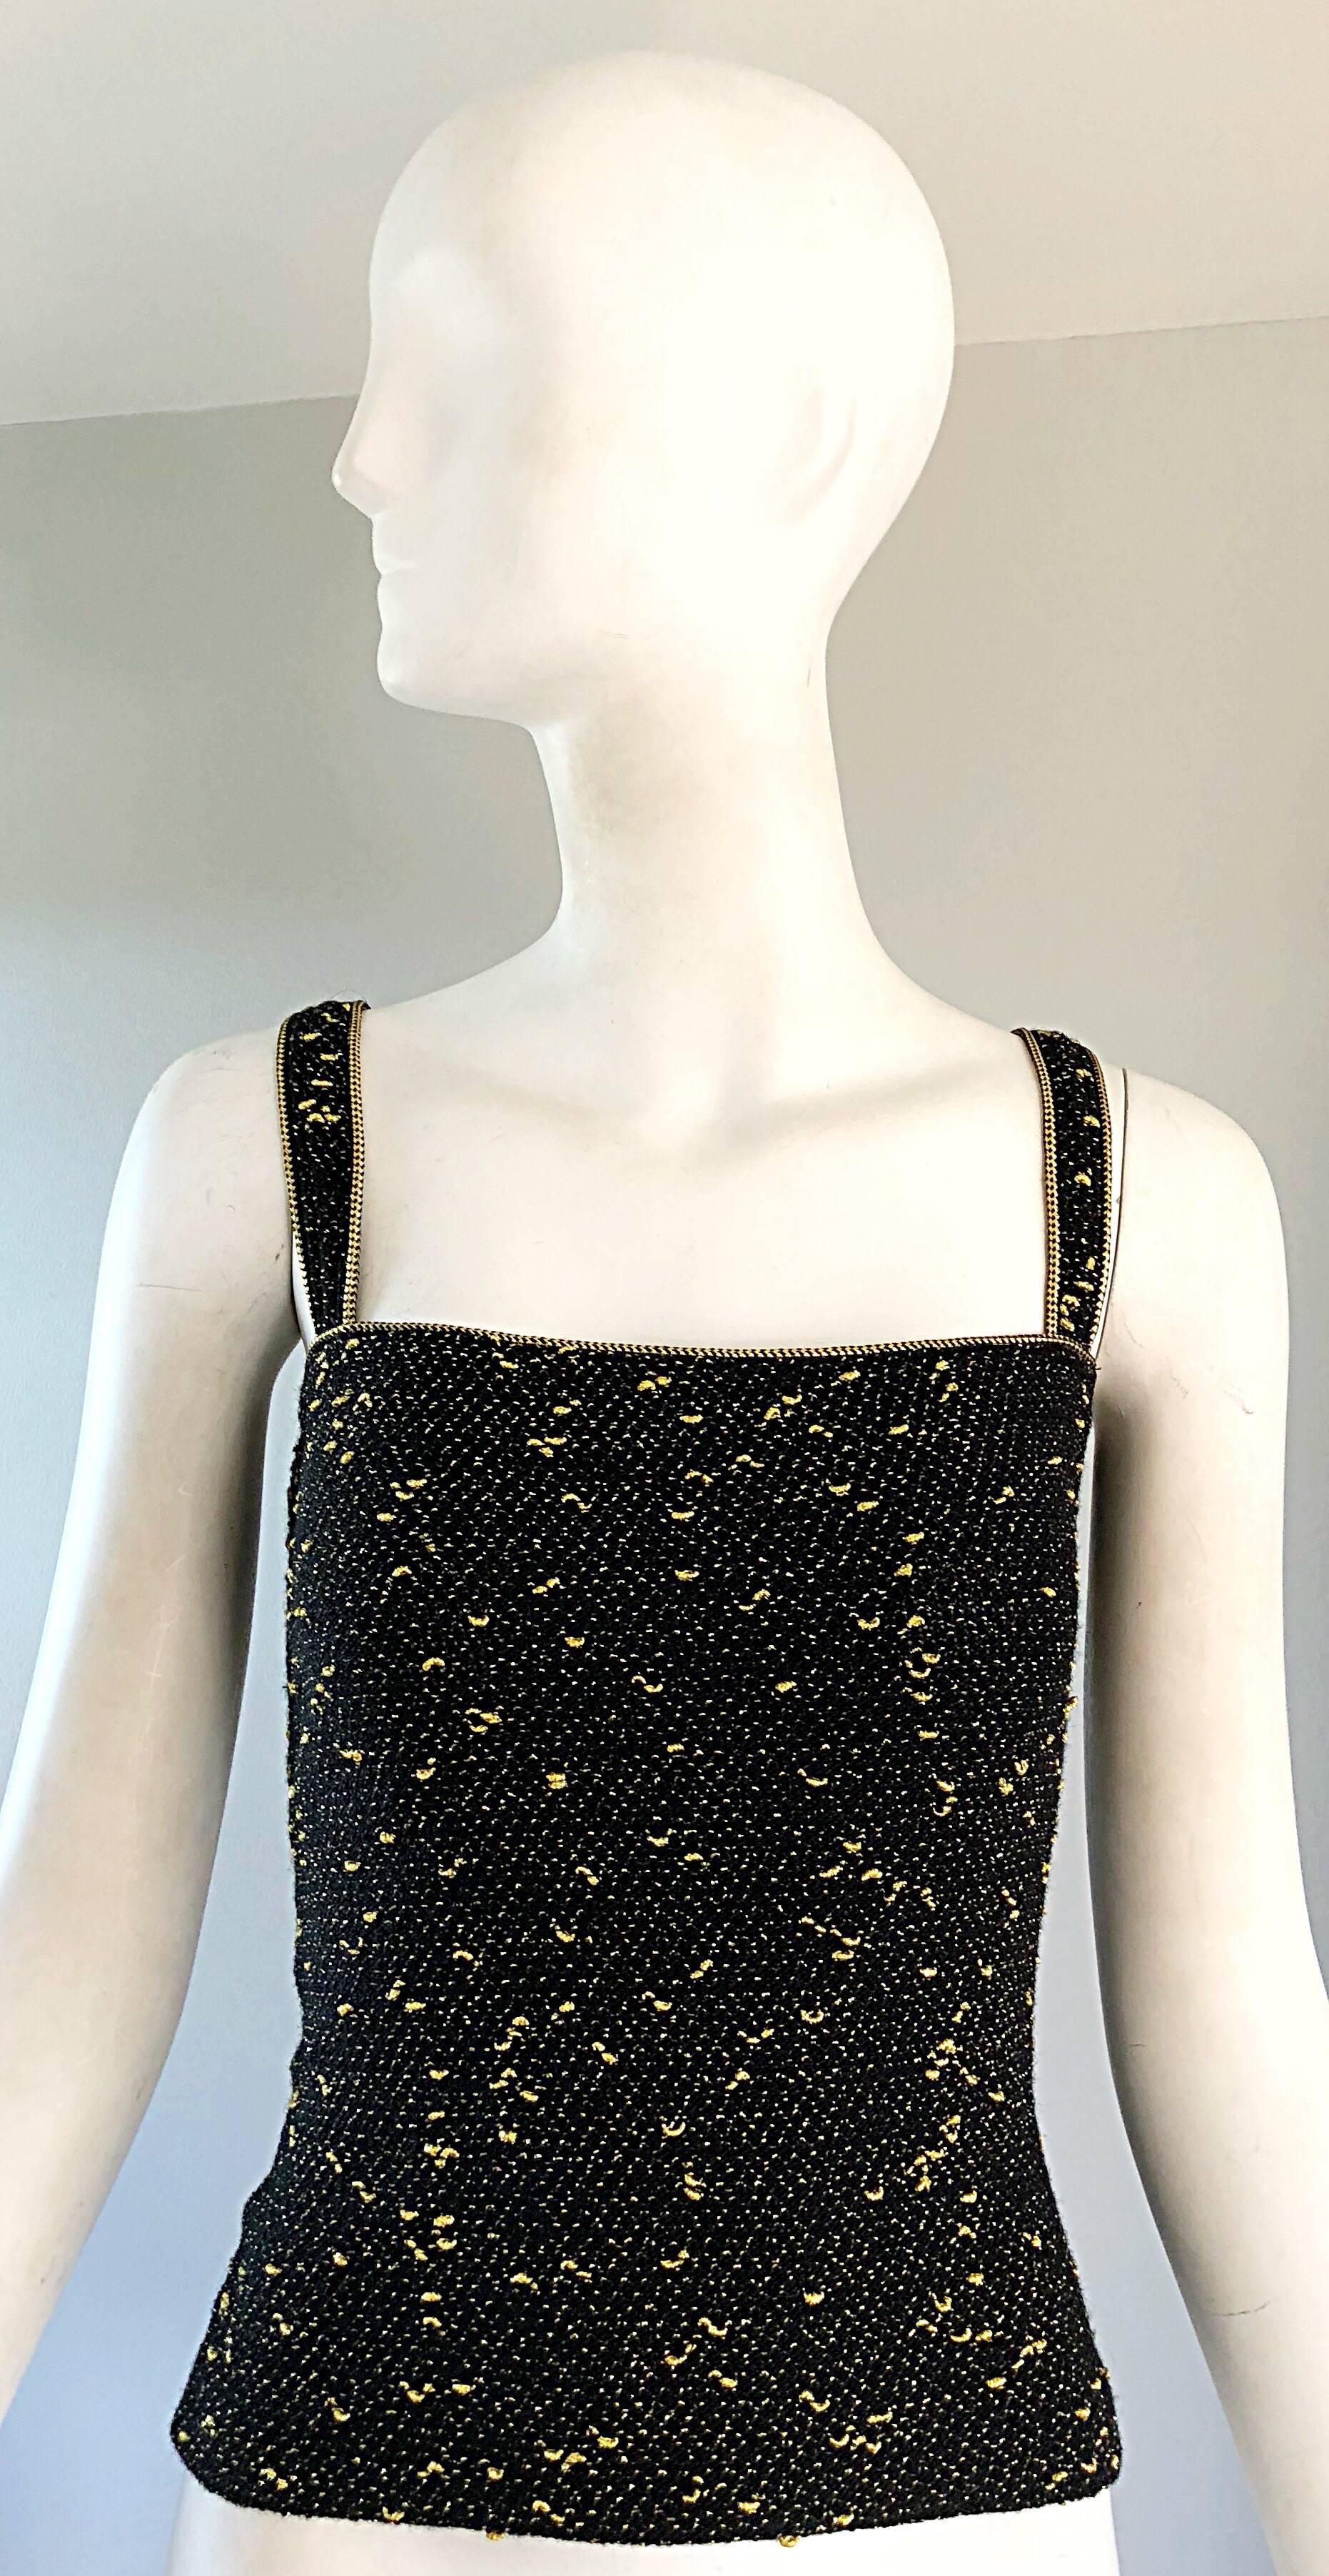 Sexy vintage 70s YSL black and gold metallic sleeveless shirt blouse ! Features a soft black knit stretchy fabric, with gold lurex throughout. Hidden side button holds everything in place. Can easily be dressed up or down. Great with shorts, jeans